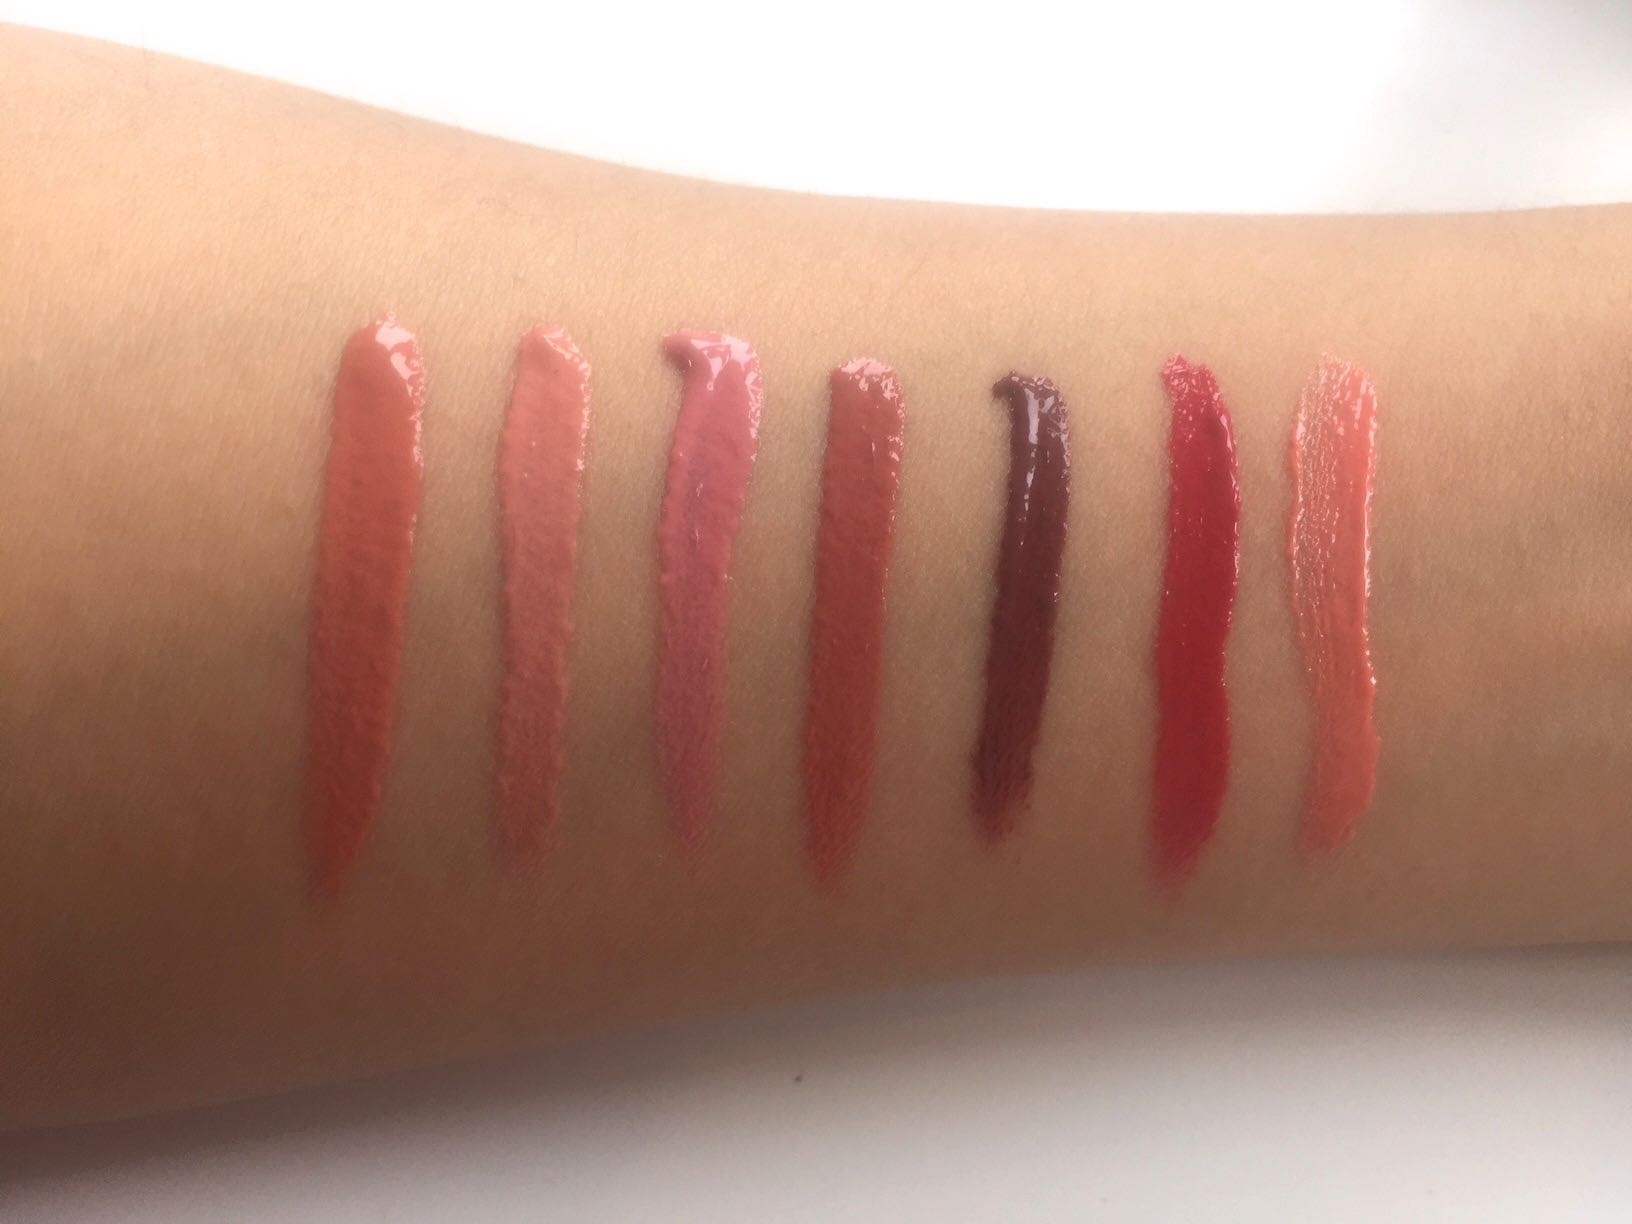 Gerard Cosmetics Lipglosses Review and Swatches - arm swatches 2- by Face Made Up